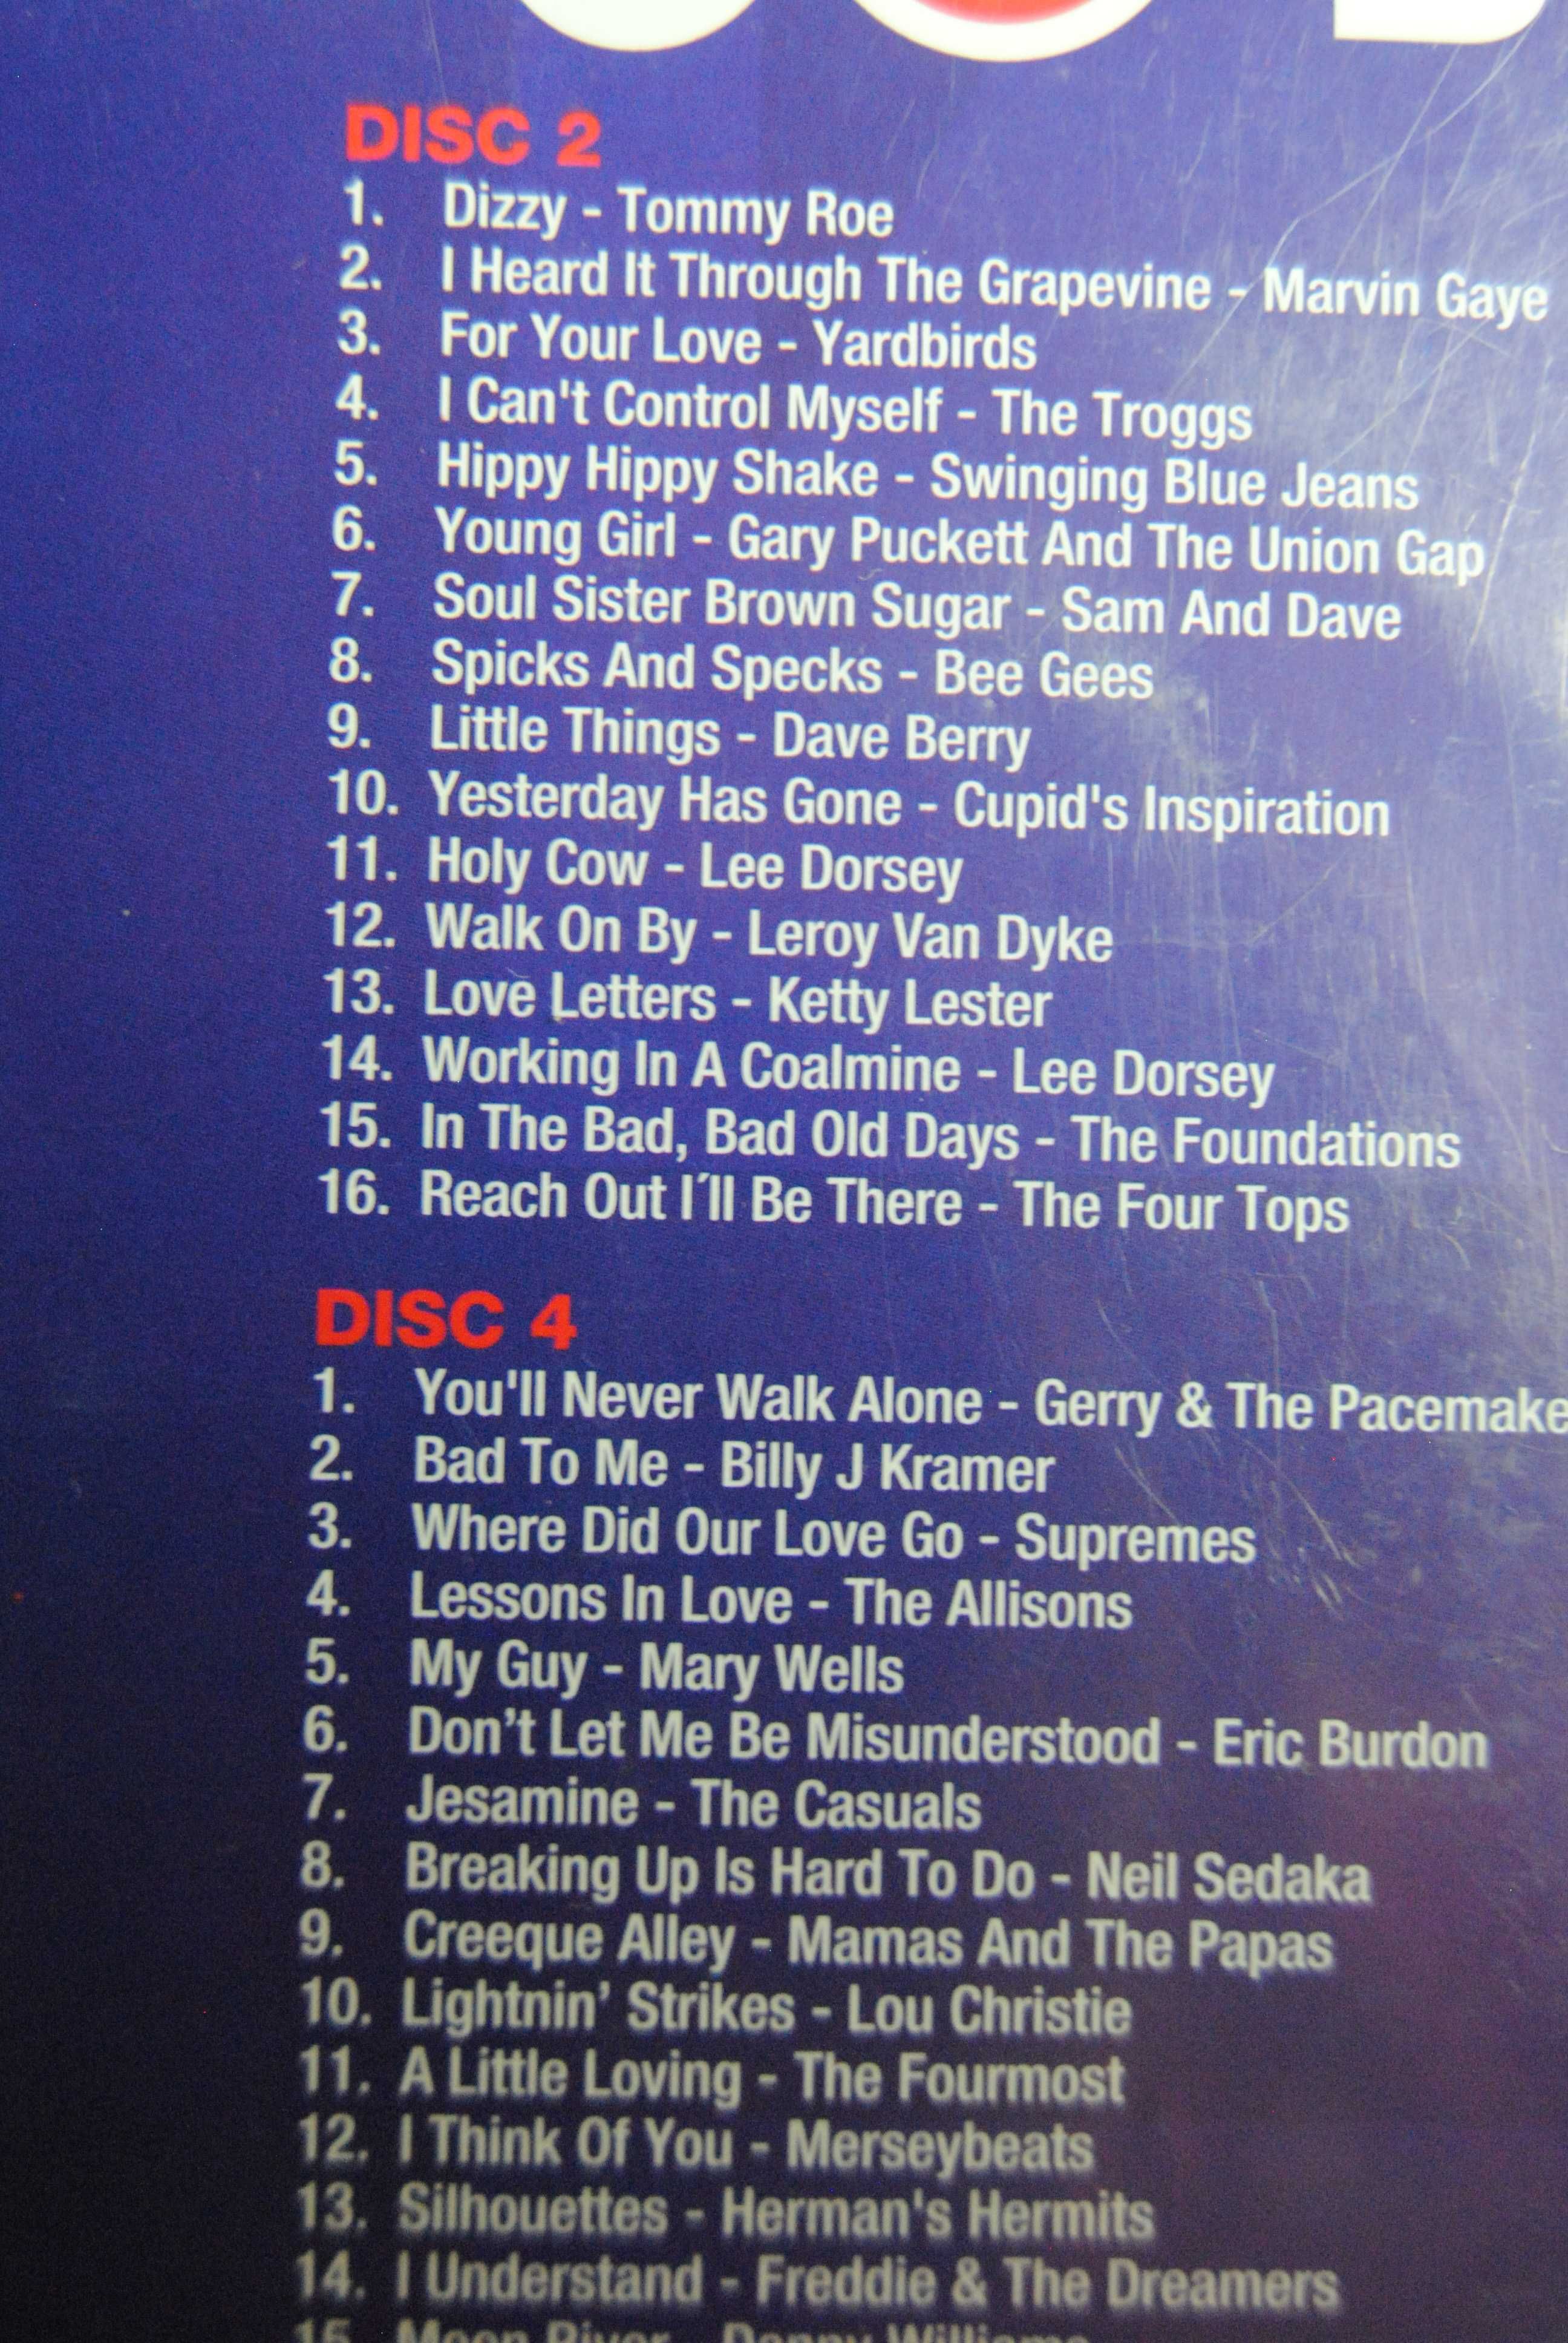 The Fab 60's 6CD Collector's Edition